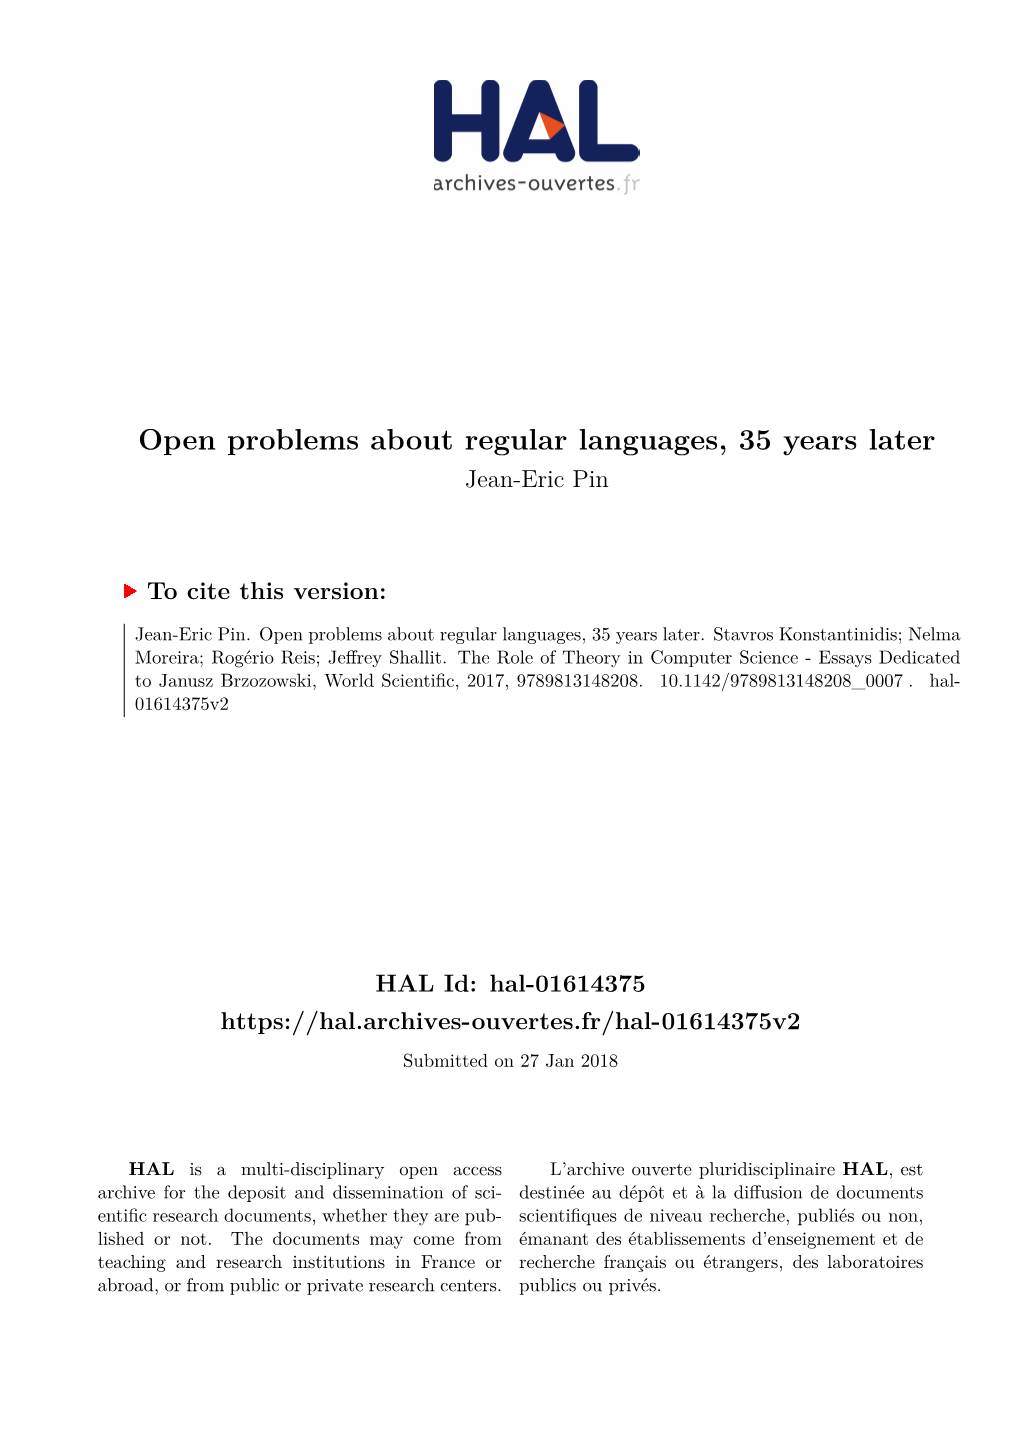 Open Problems About Regular Languages, 35 Years Later Jean-Eric Pin